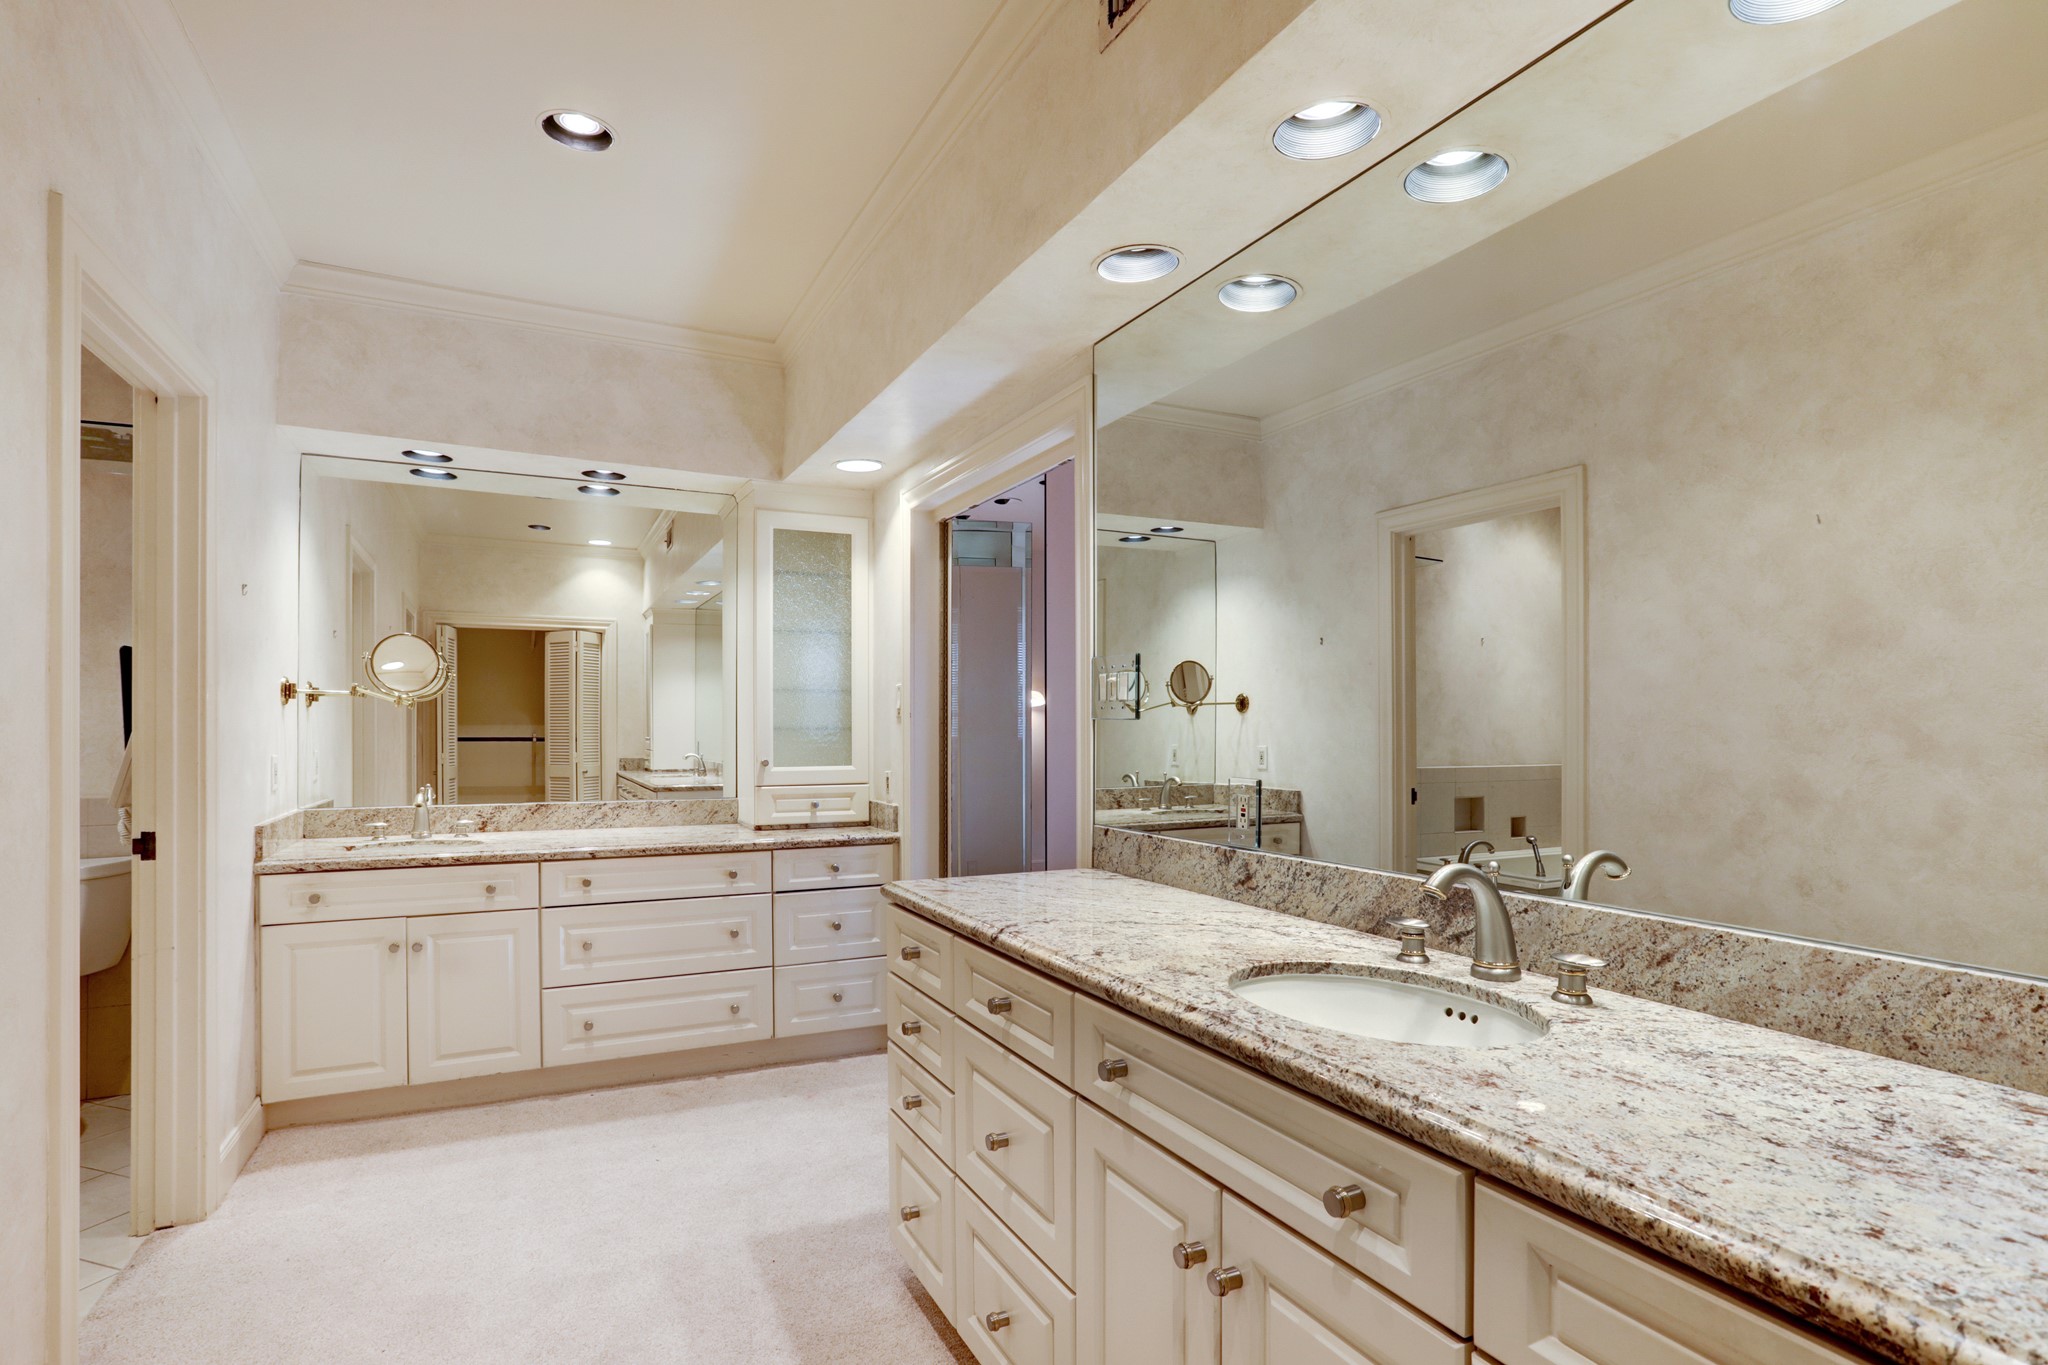 Primary bath with granite counters and two vanities each with drawers and cabinet storage.